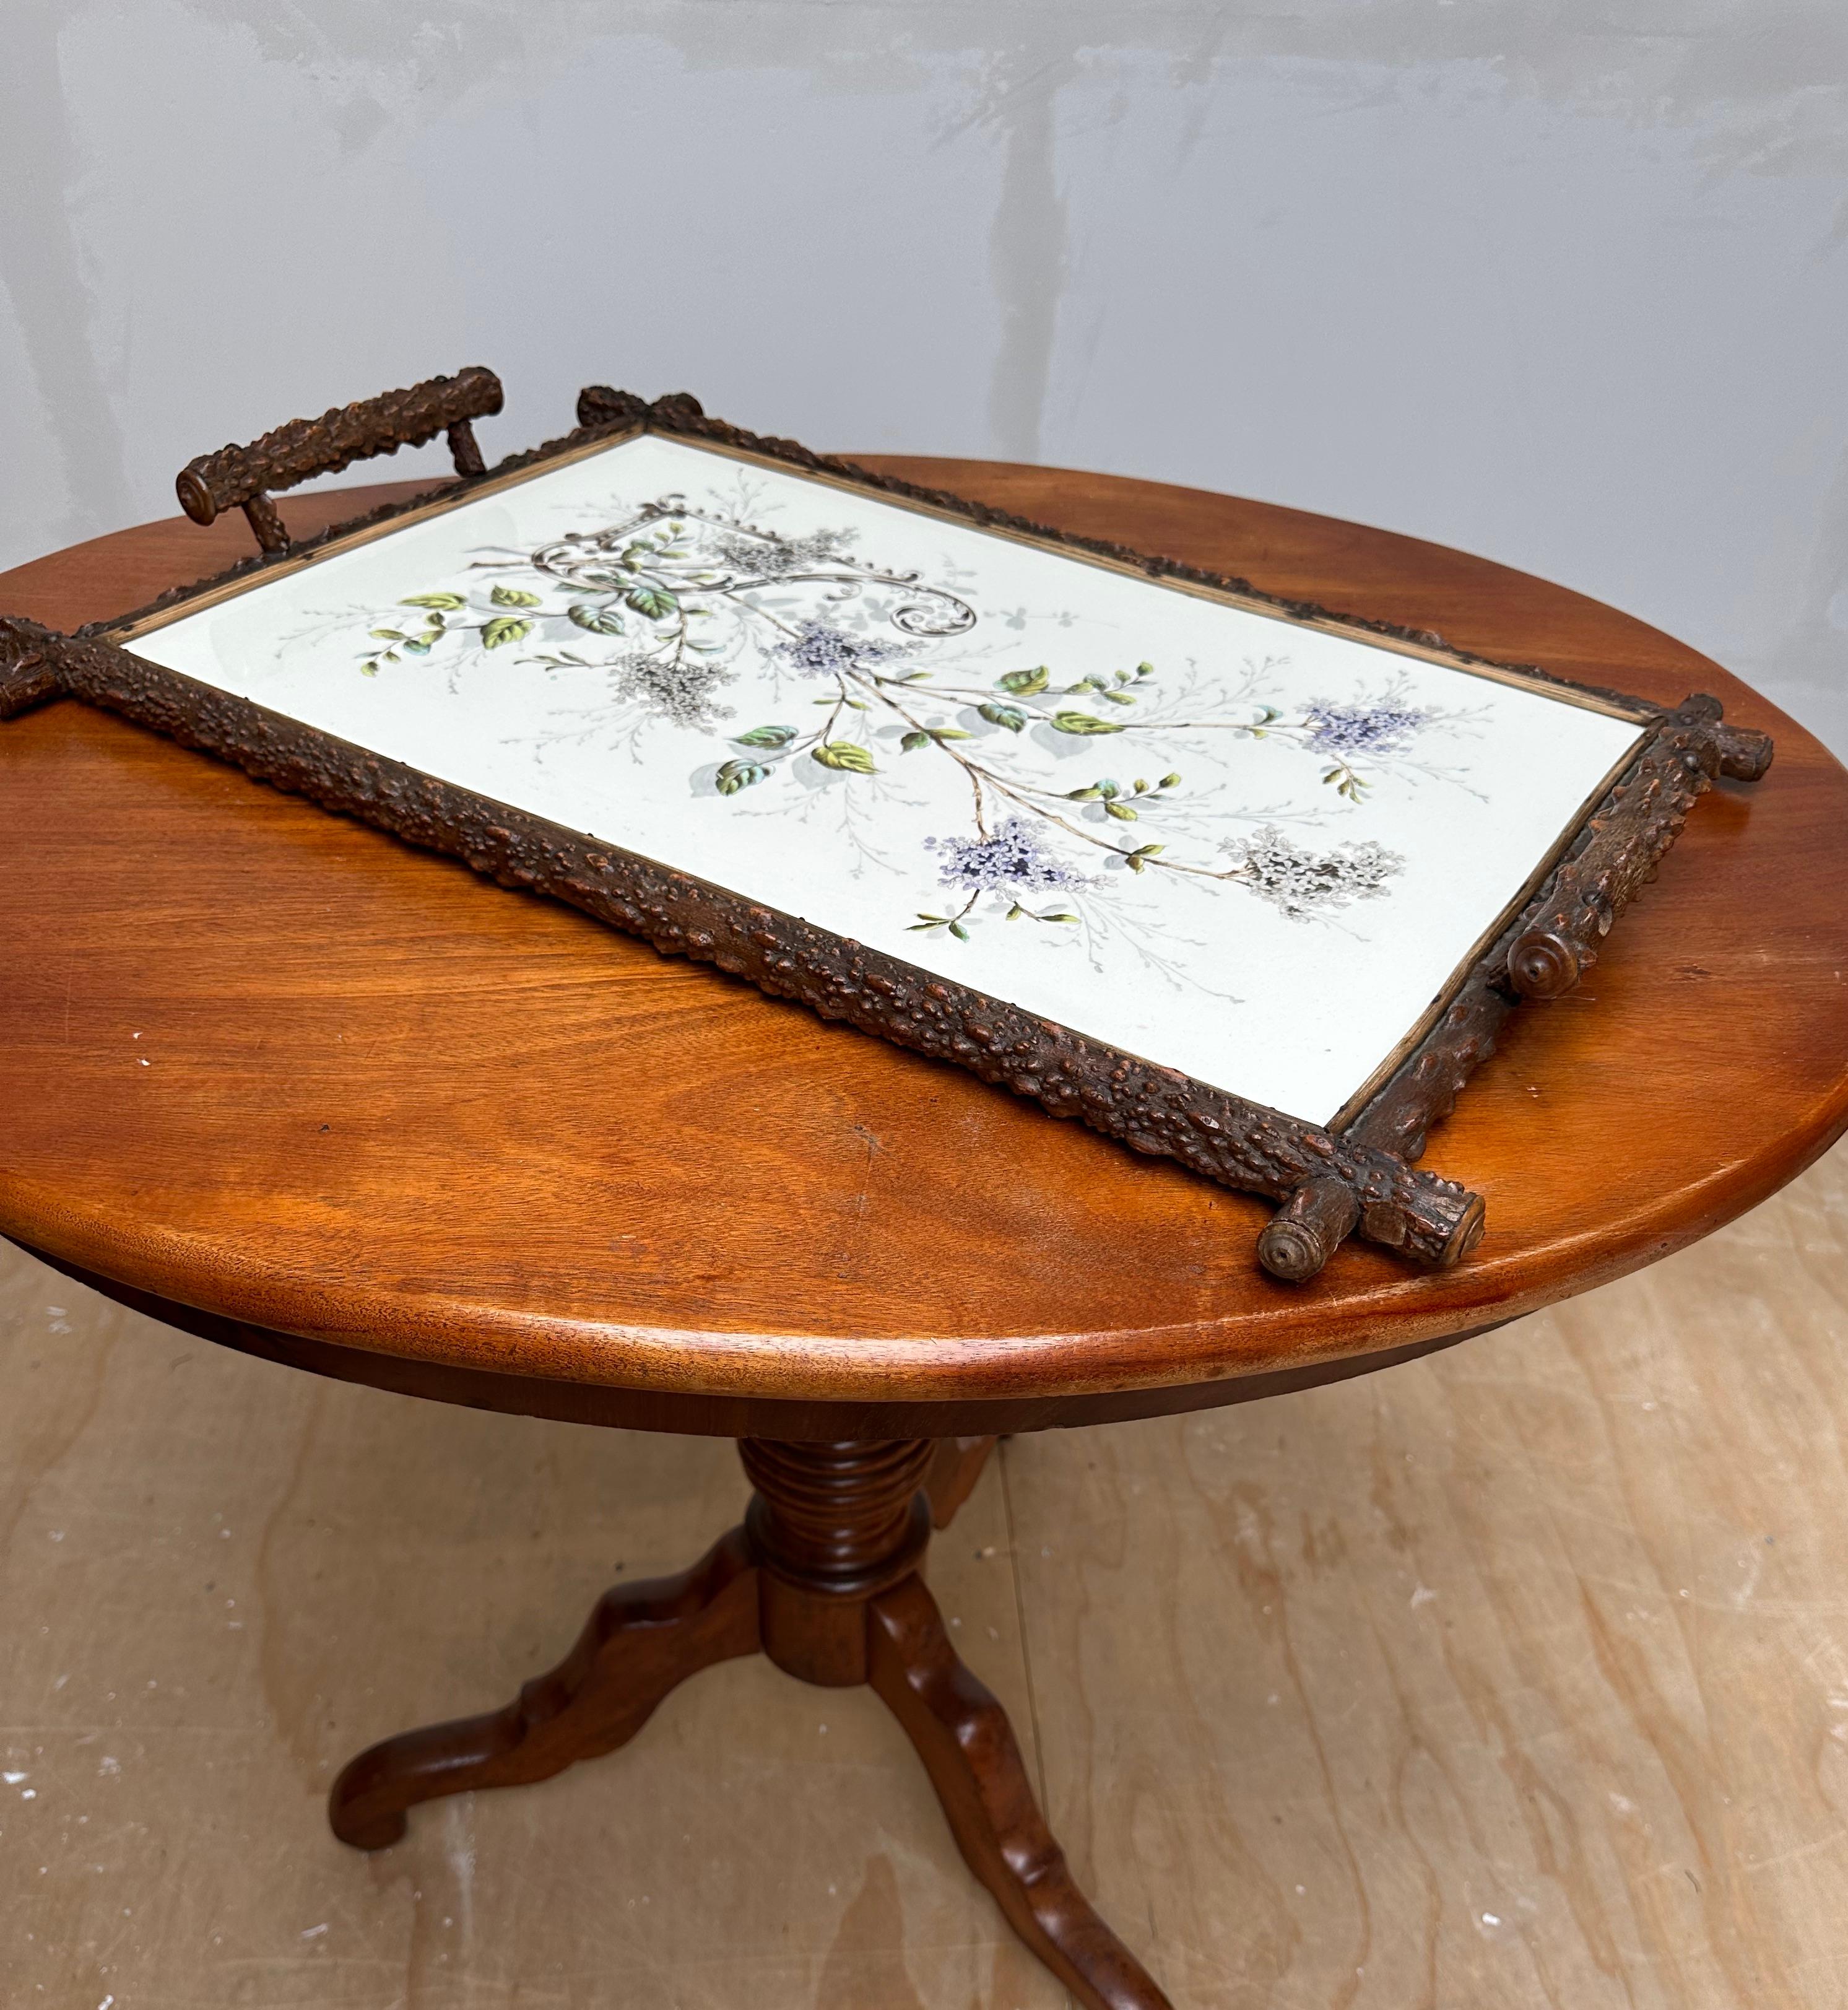 Antique & Extra Large Arts & Crafts Hand Painted Flower Decor, Tile Serving Tray For Sale 2